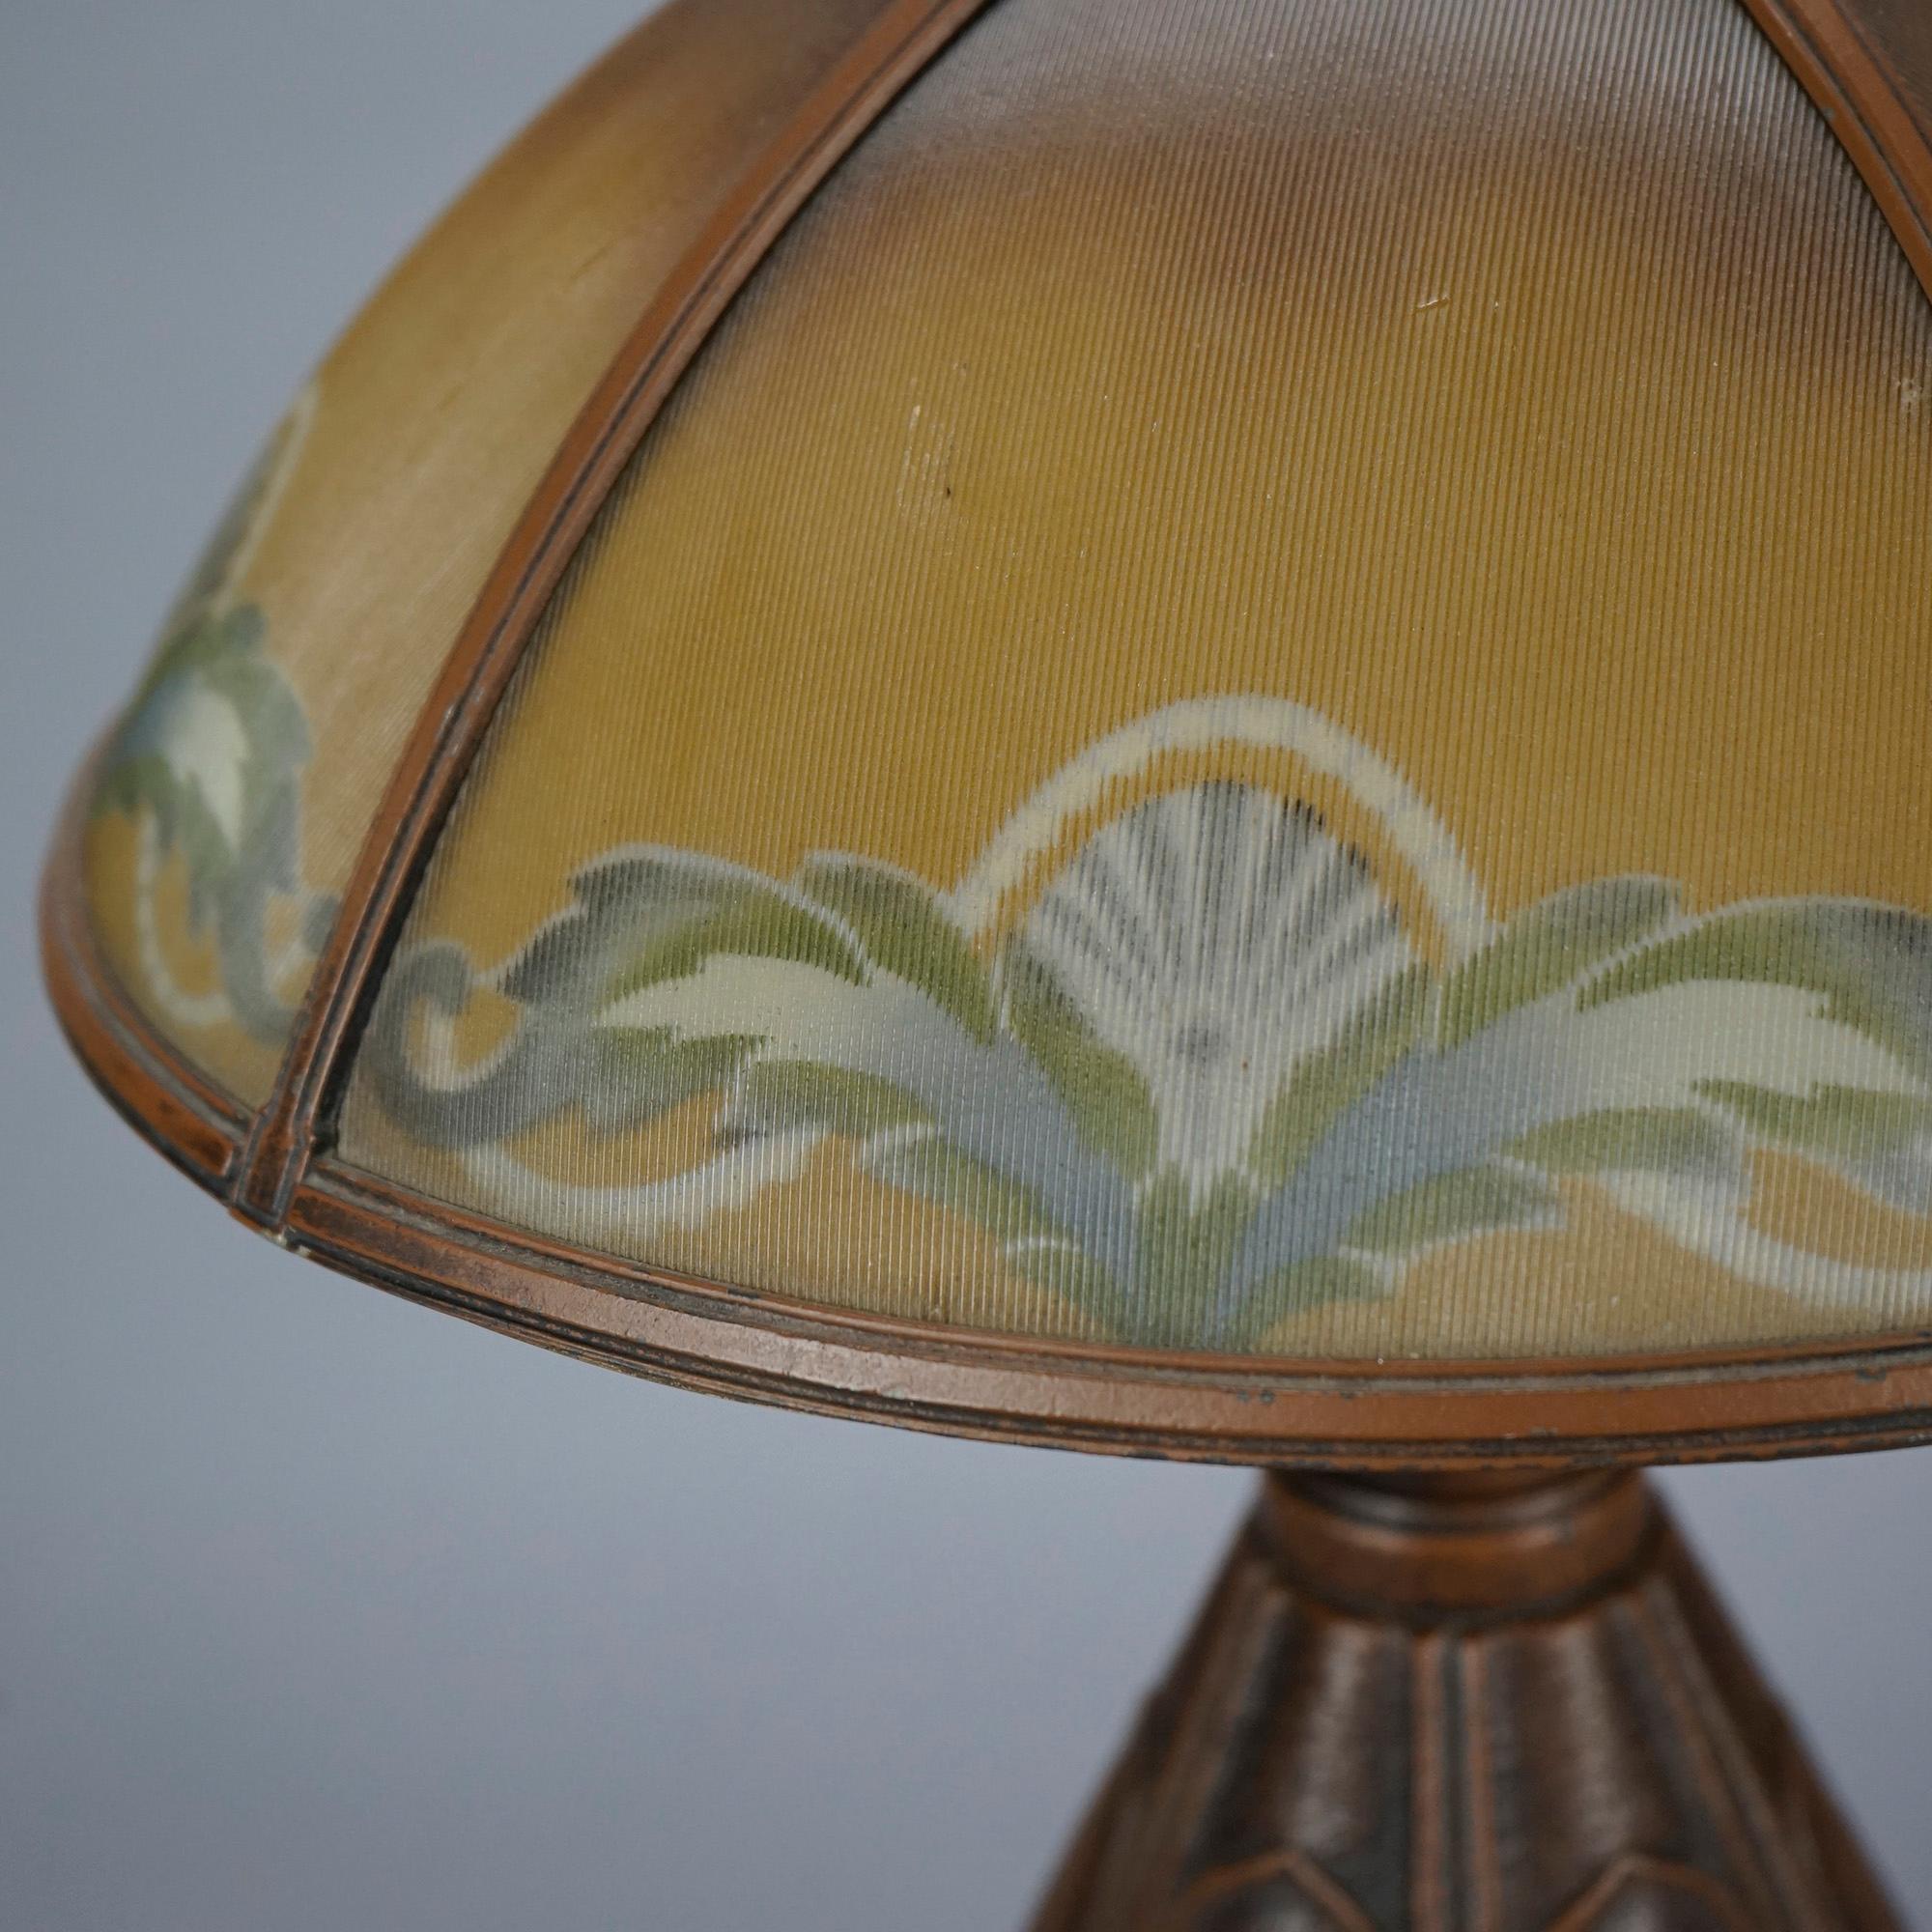 Arts and Crafts Antique Arts & Crafts Bradley & Hubbard Lamp & Reverse Painted Shade, C1910